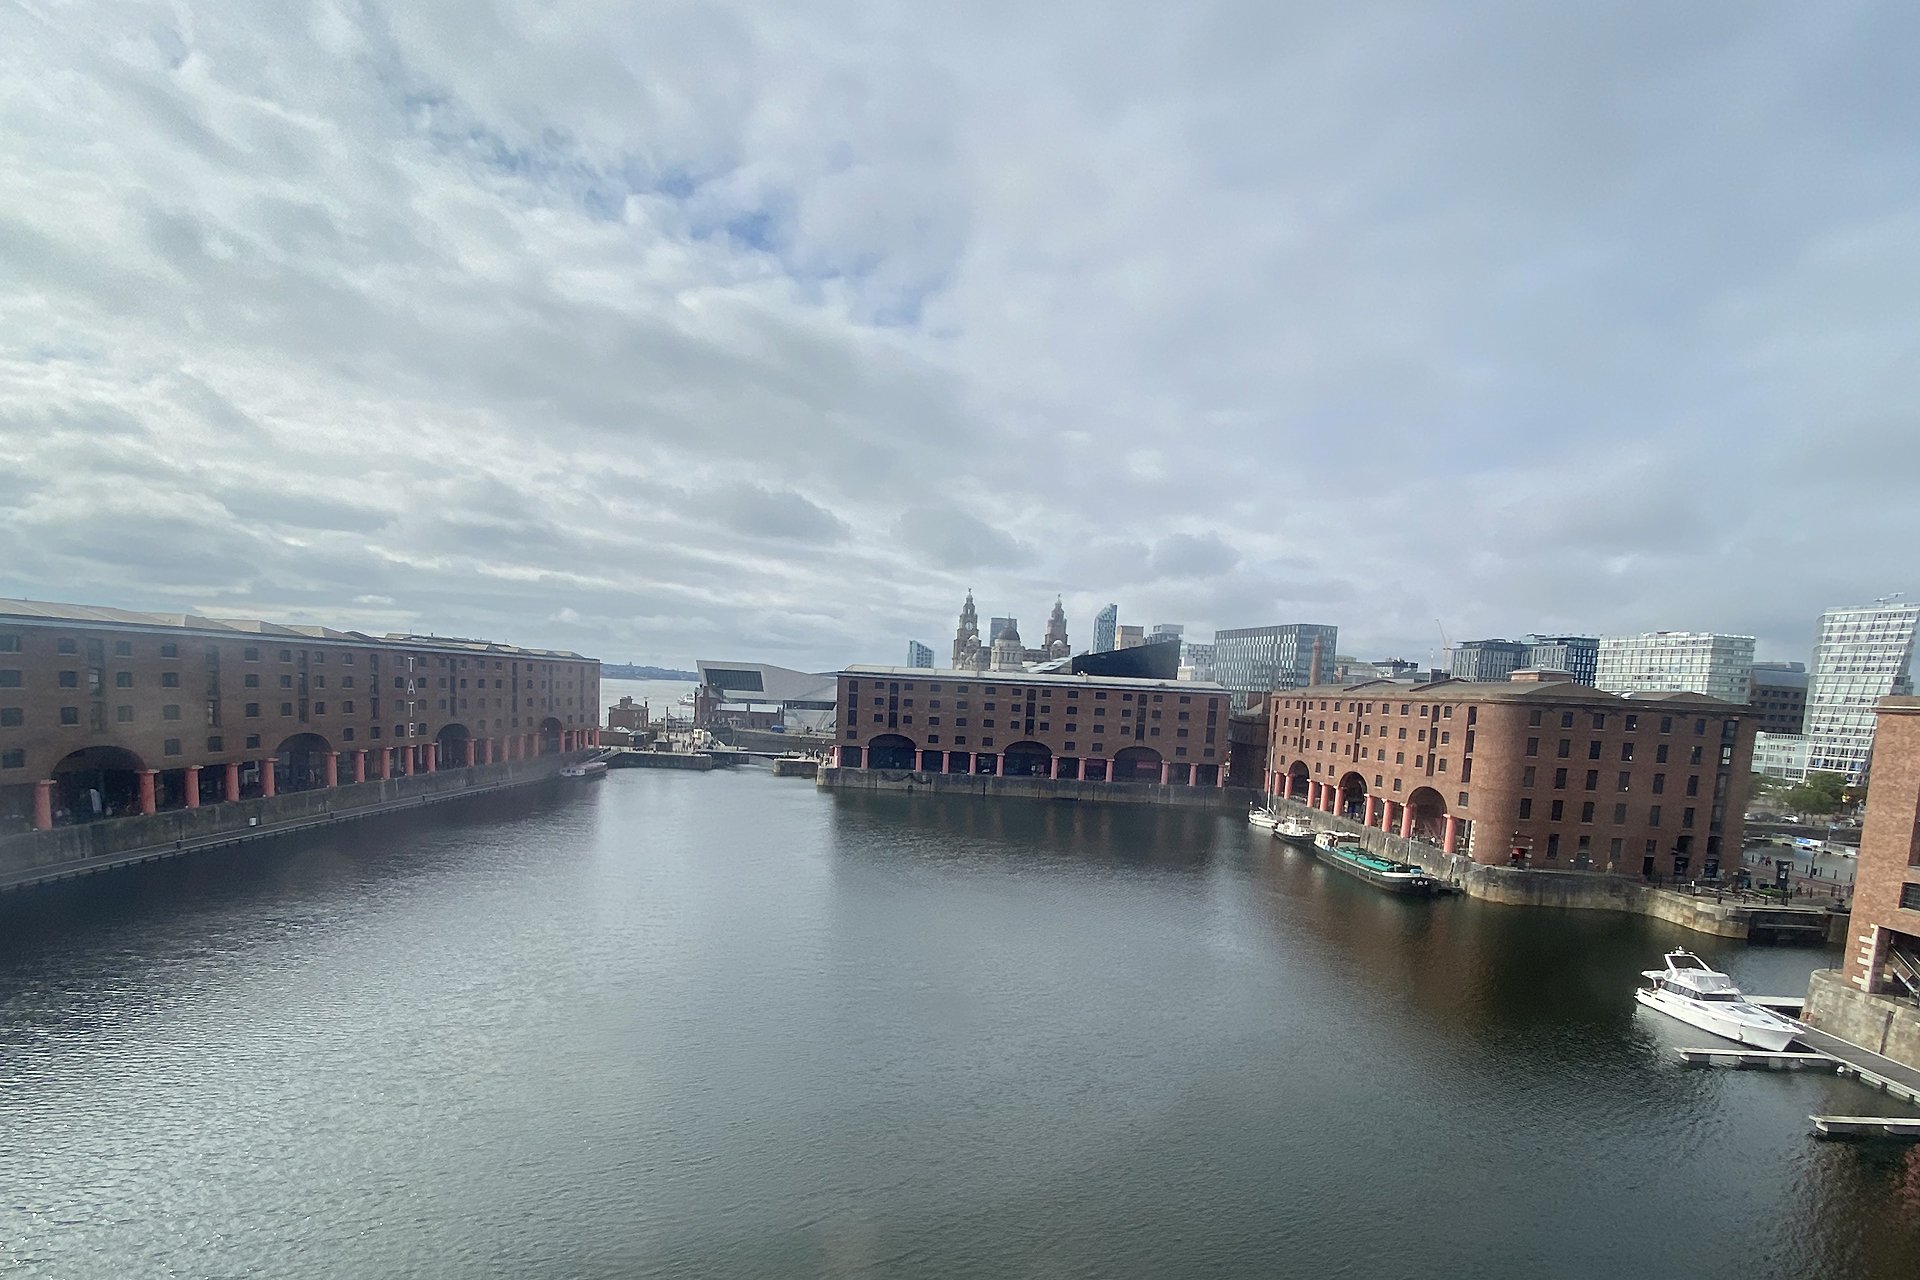 View from the Holiday Inn over Royal Albert Docks